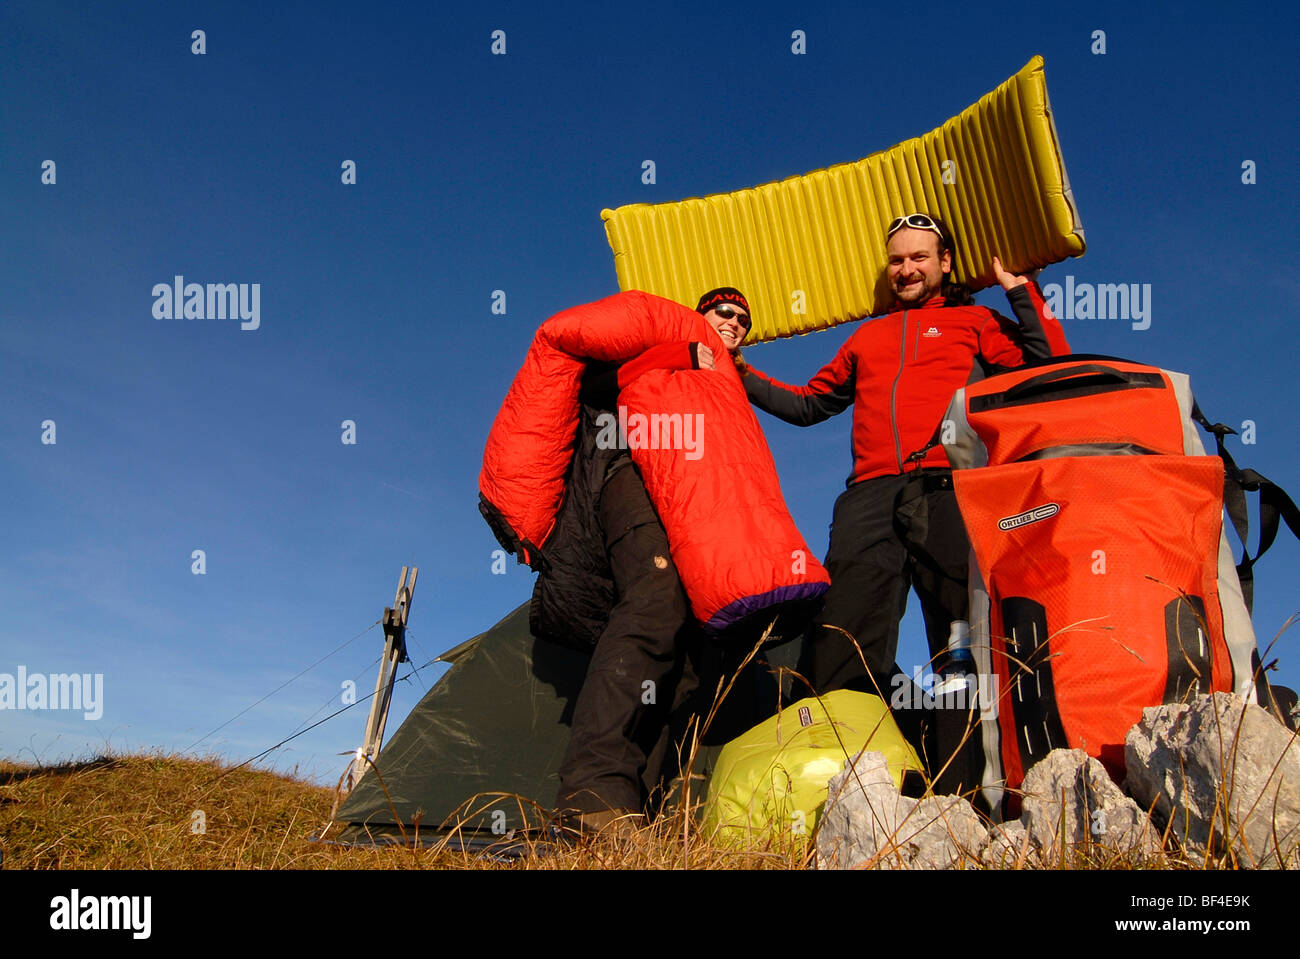 Hikers, young man and woman having fun while putting up a bivouac with tent, sleeping bag, backpack and sleeping pad, Heidachst Stock Photo